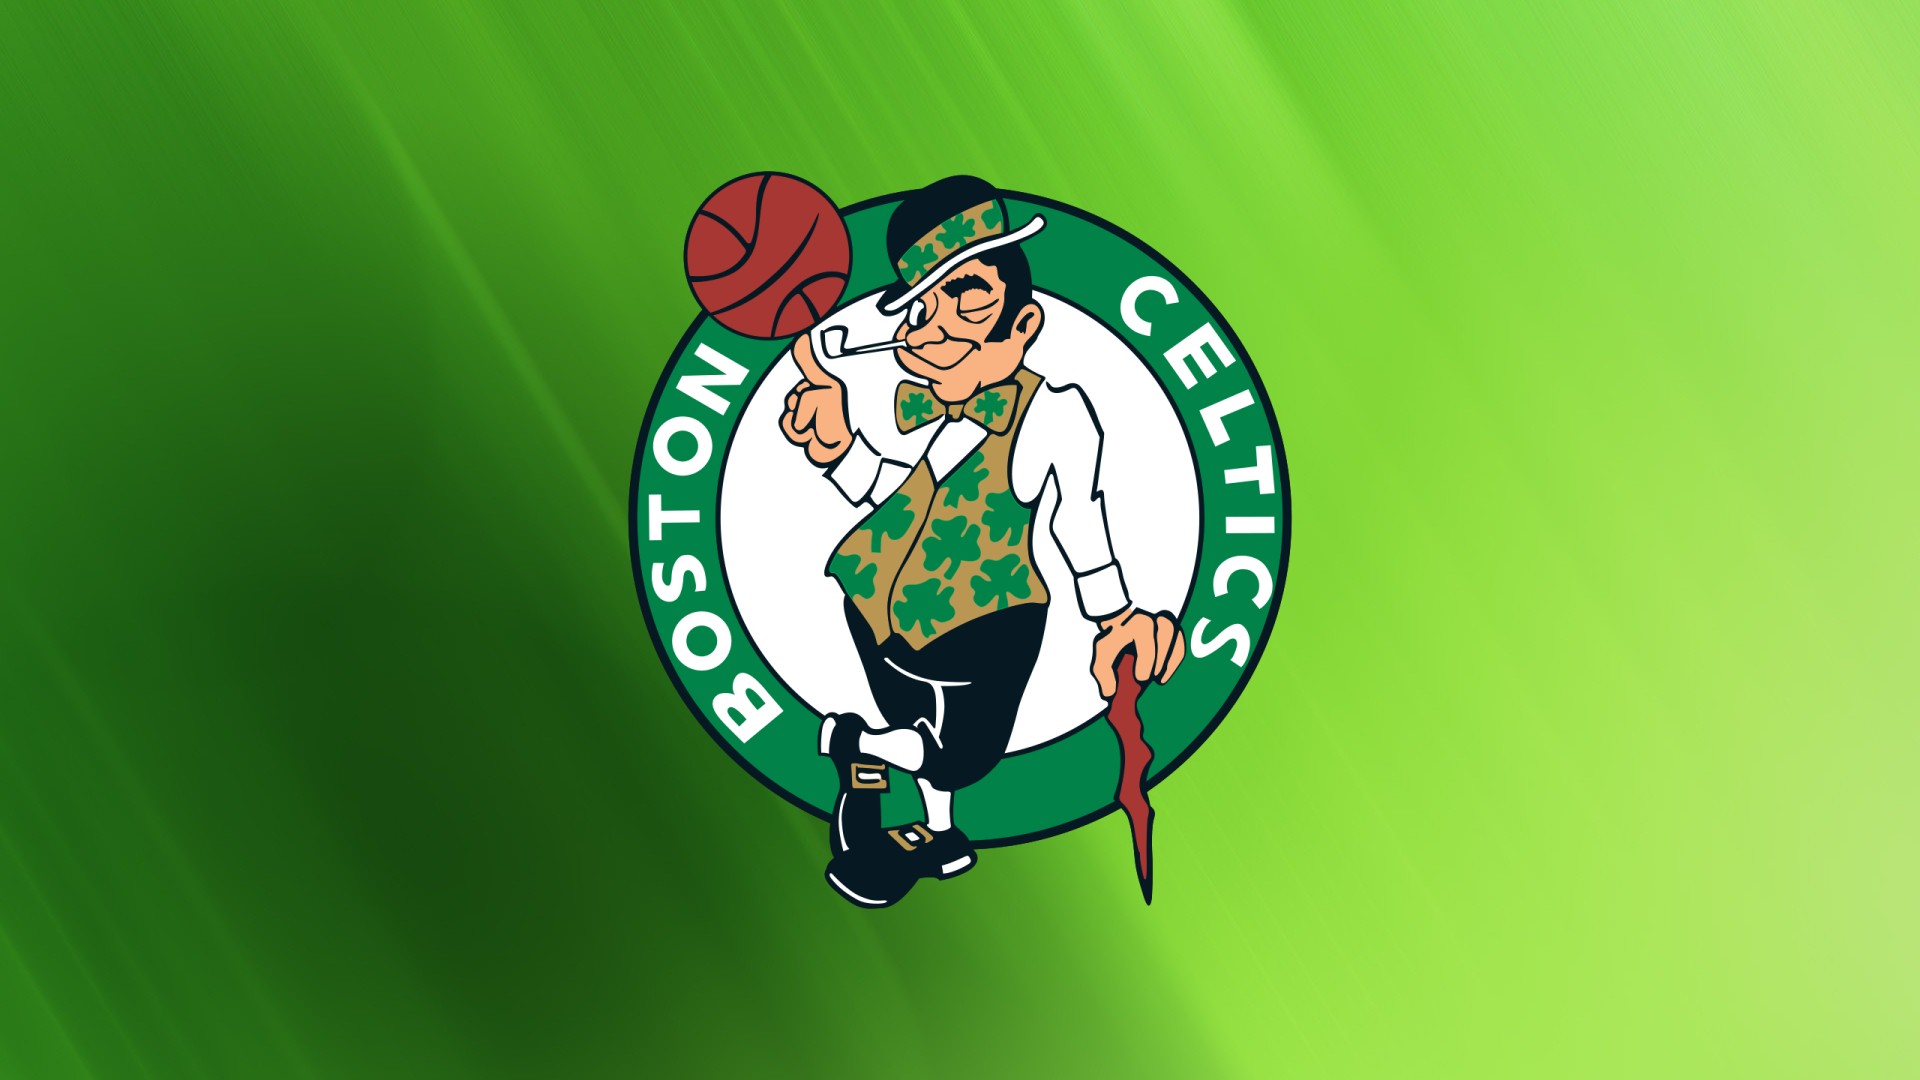 Boston Celtics Logo Wallpaper For Mac Backgrounds with image dimensions 1920x1080 pixel. You can make this wallpaper for your Desktop Computer Backgrounds, Windows or Mac Screensavers, iPhone Lock screen, Tablet or Android and another Mobile Phone device